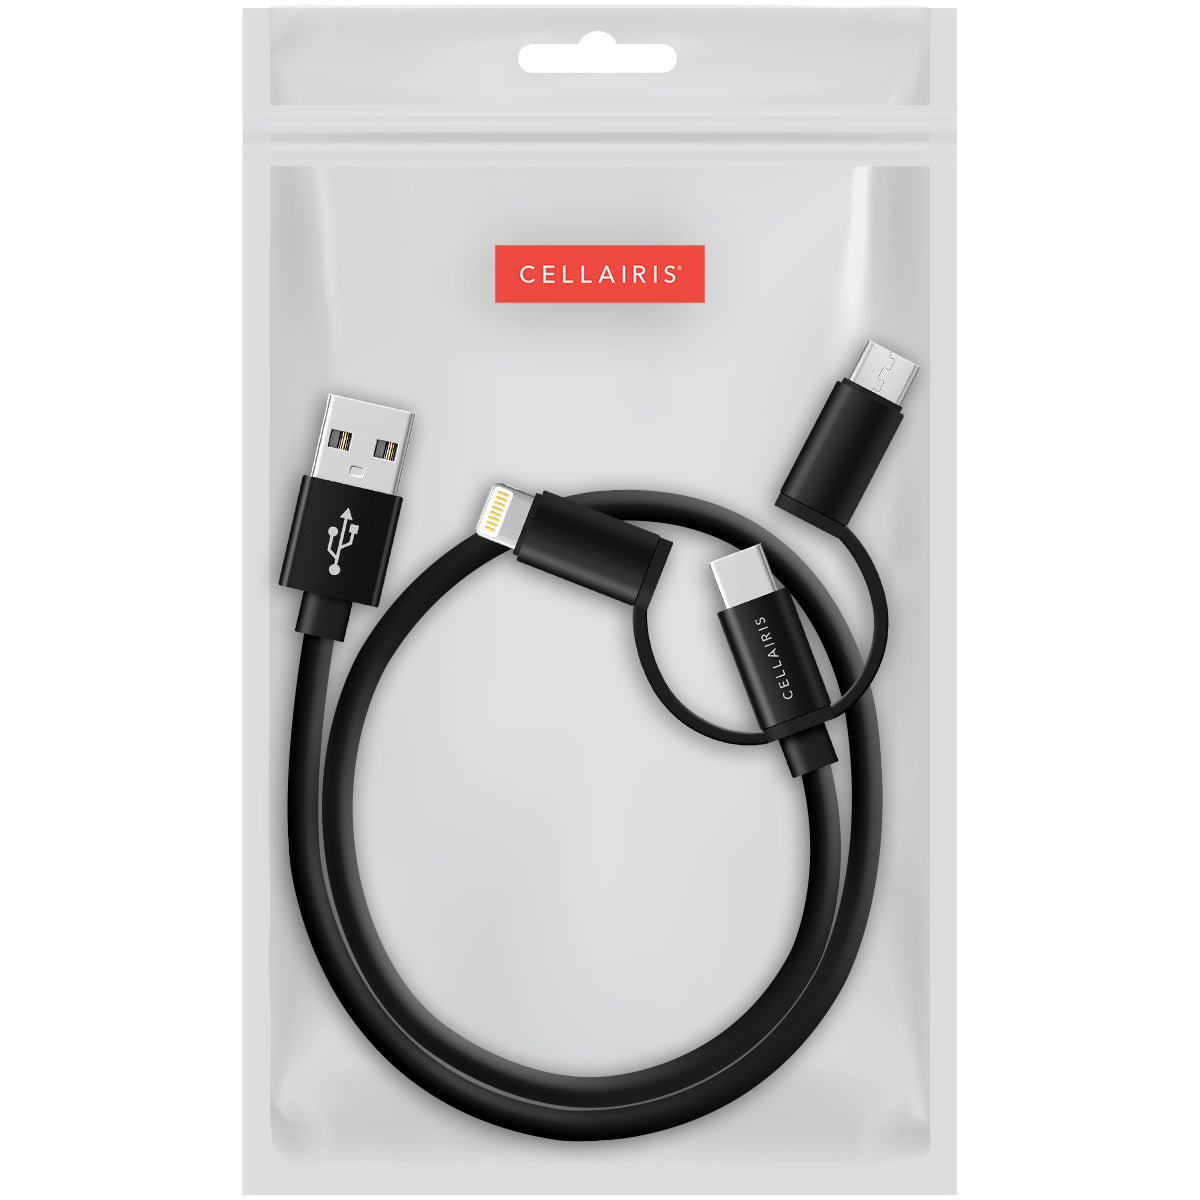 Charge Cable - 18IN USB 3-in-1 to USB-A TPE Black (Bulk) Cables